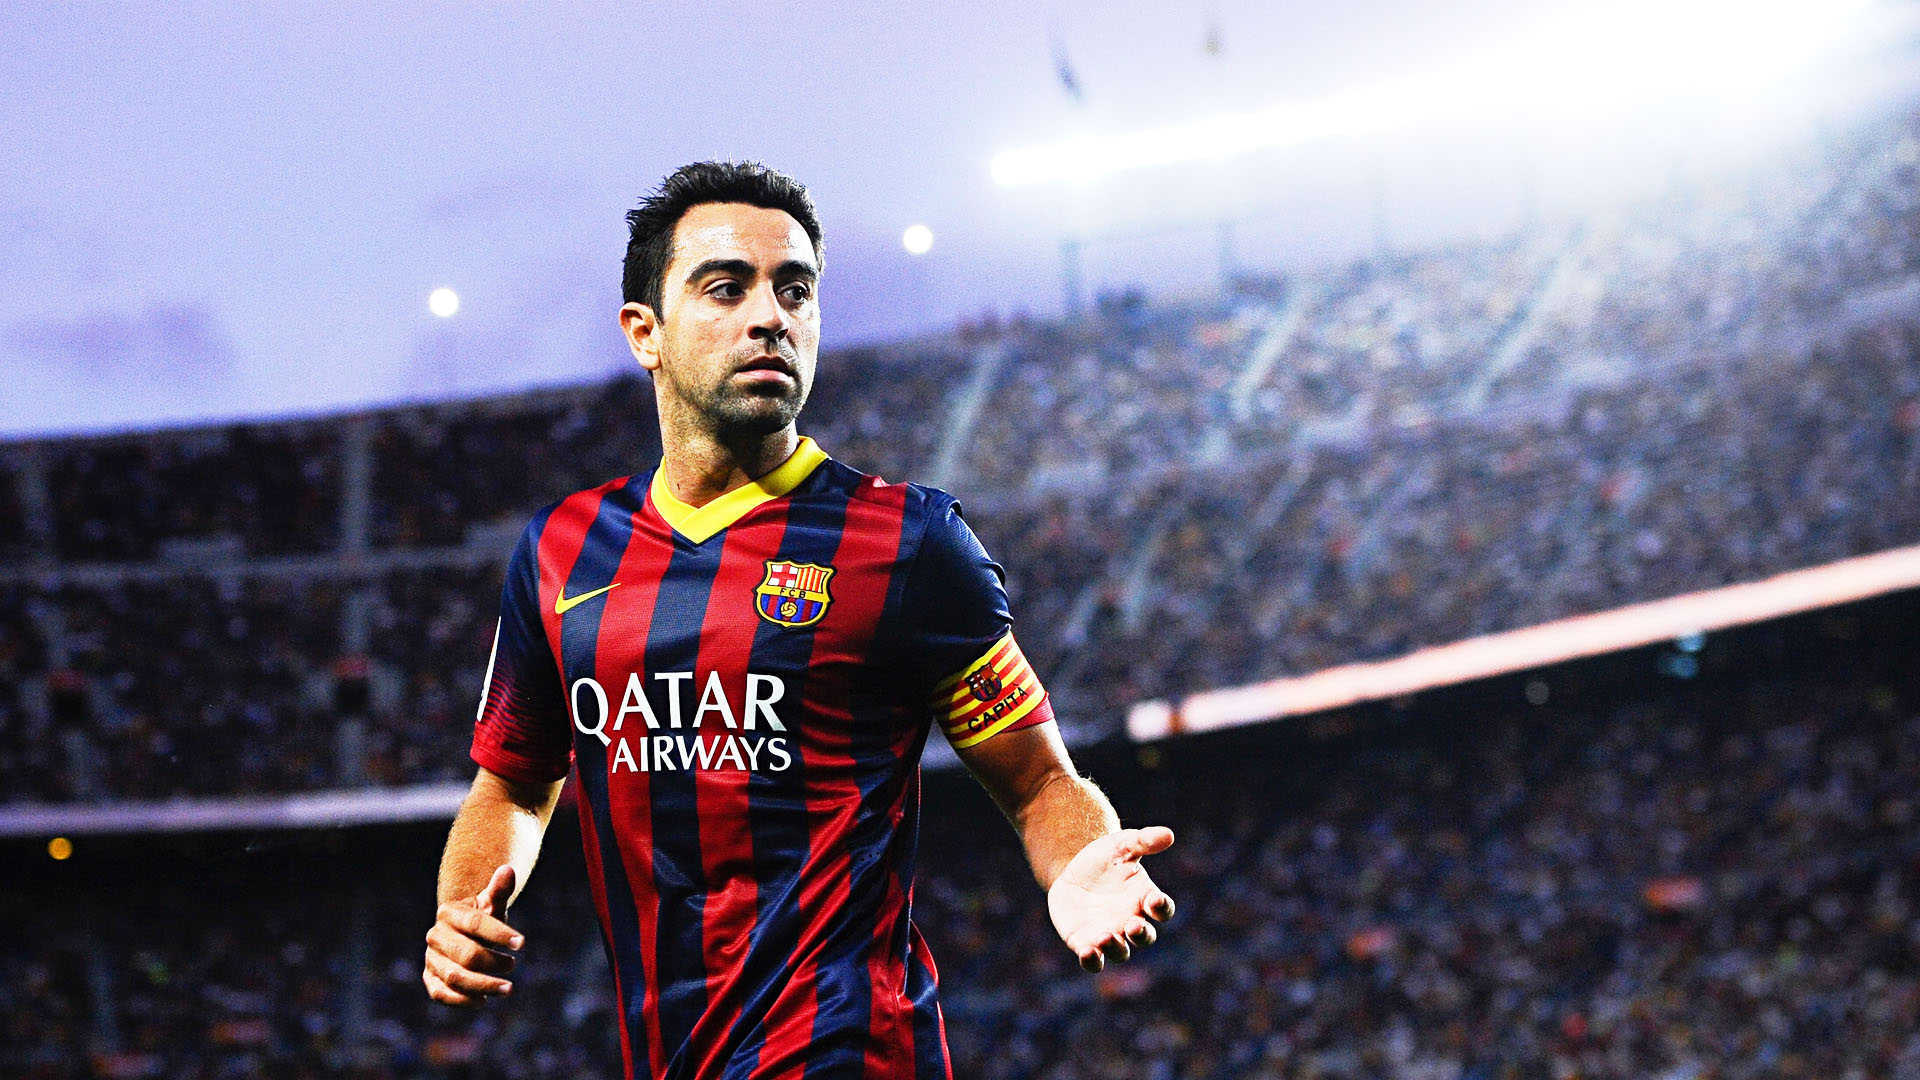 You Can Xavi Hernandez In Your Puter By Clicking